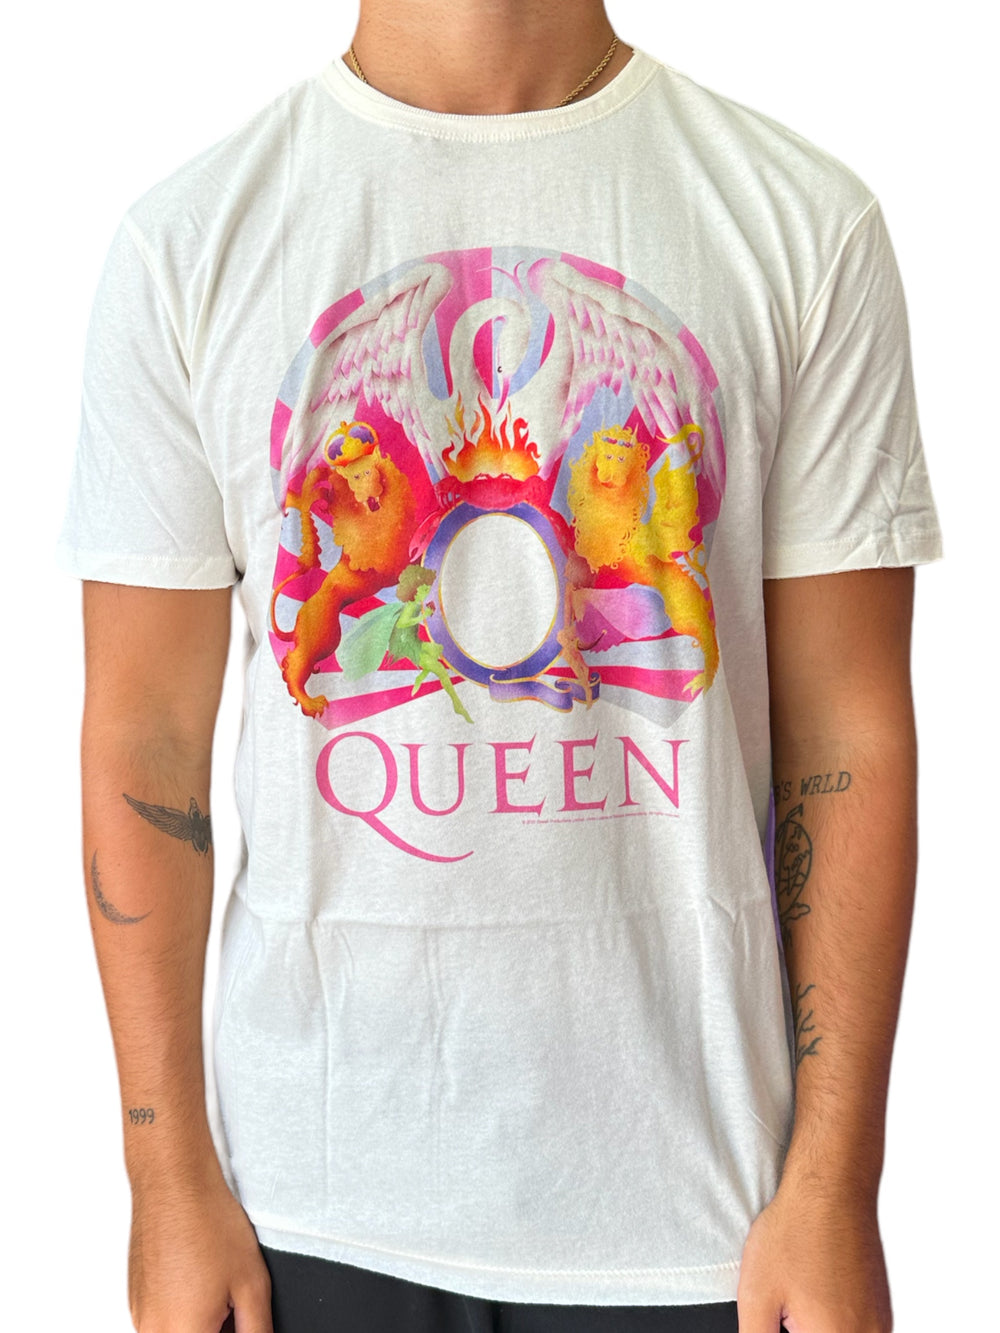 Queen Freddie A Night At The Opera  Amplified Vintage White T Shirt Various Sizes